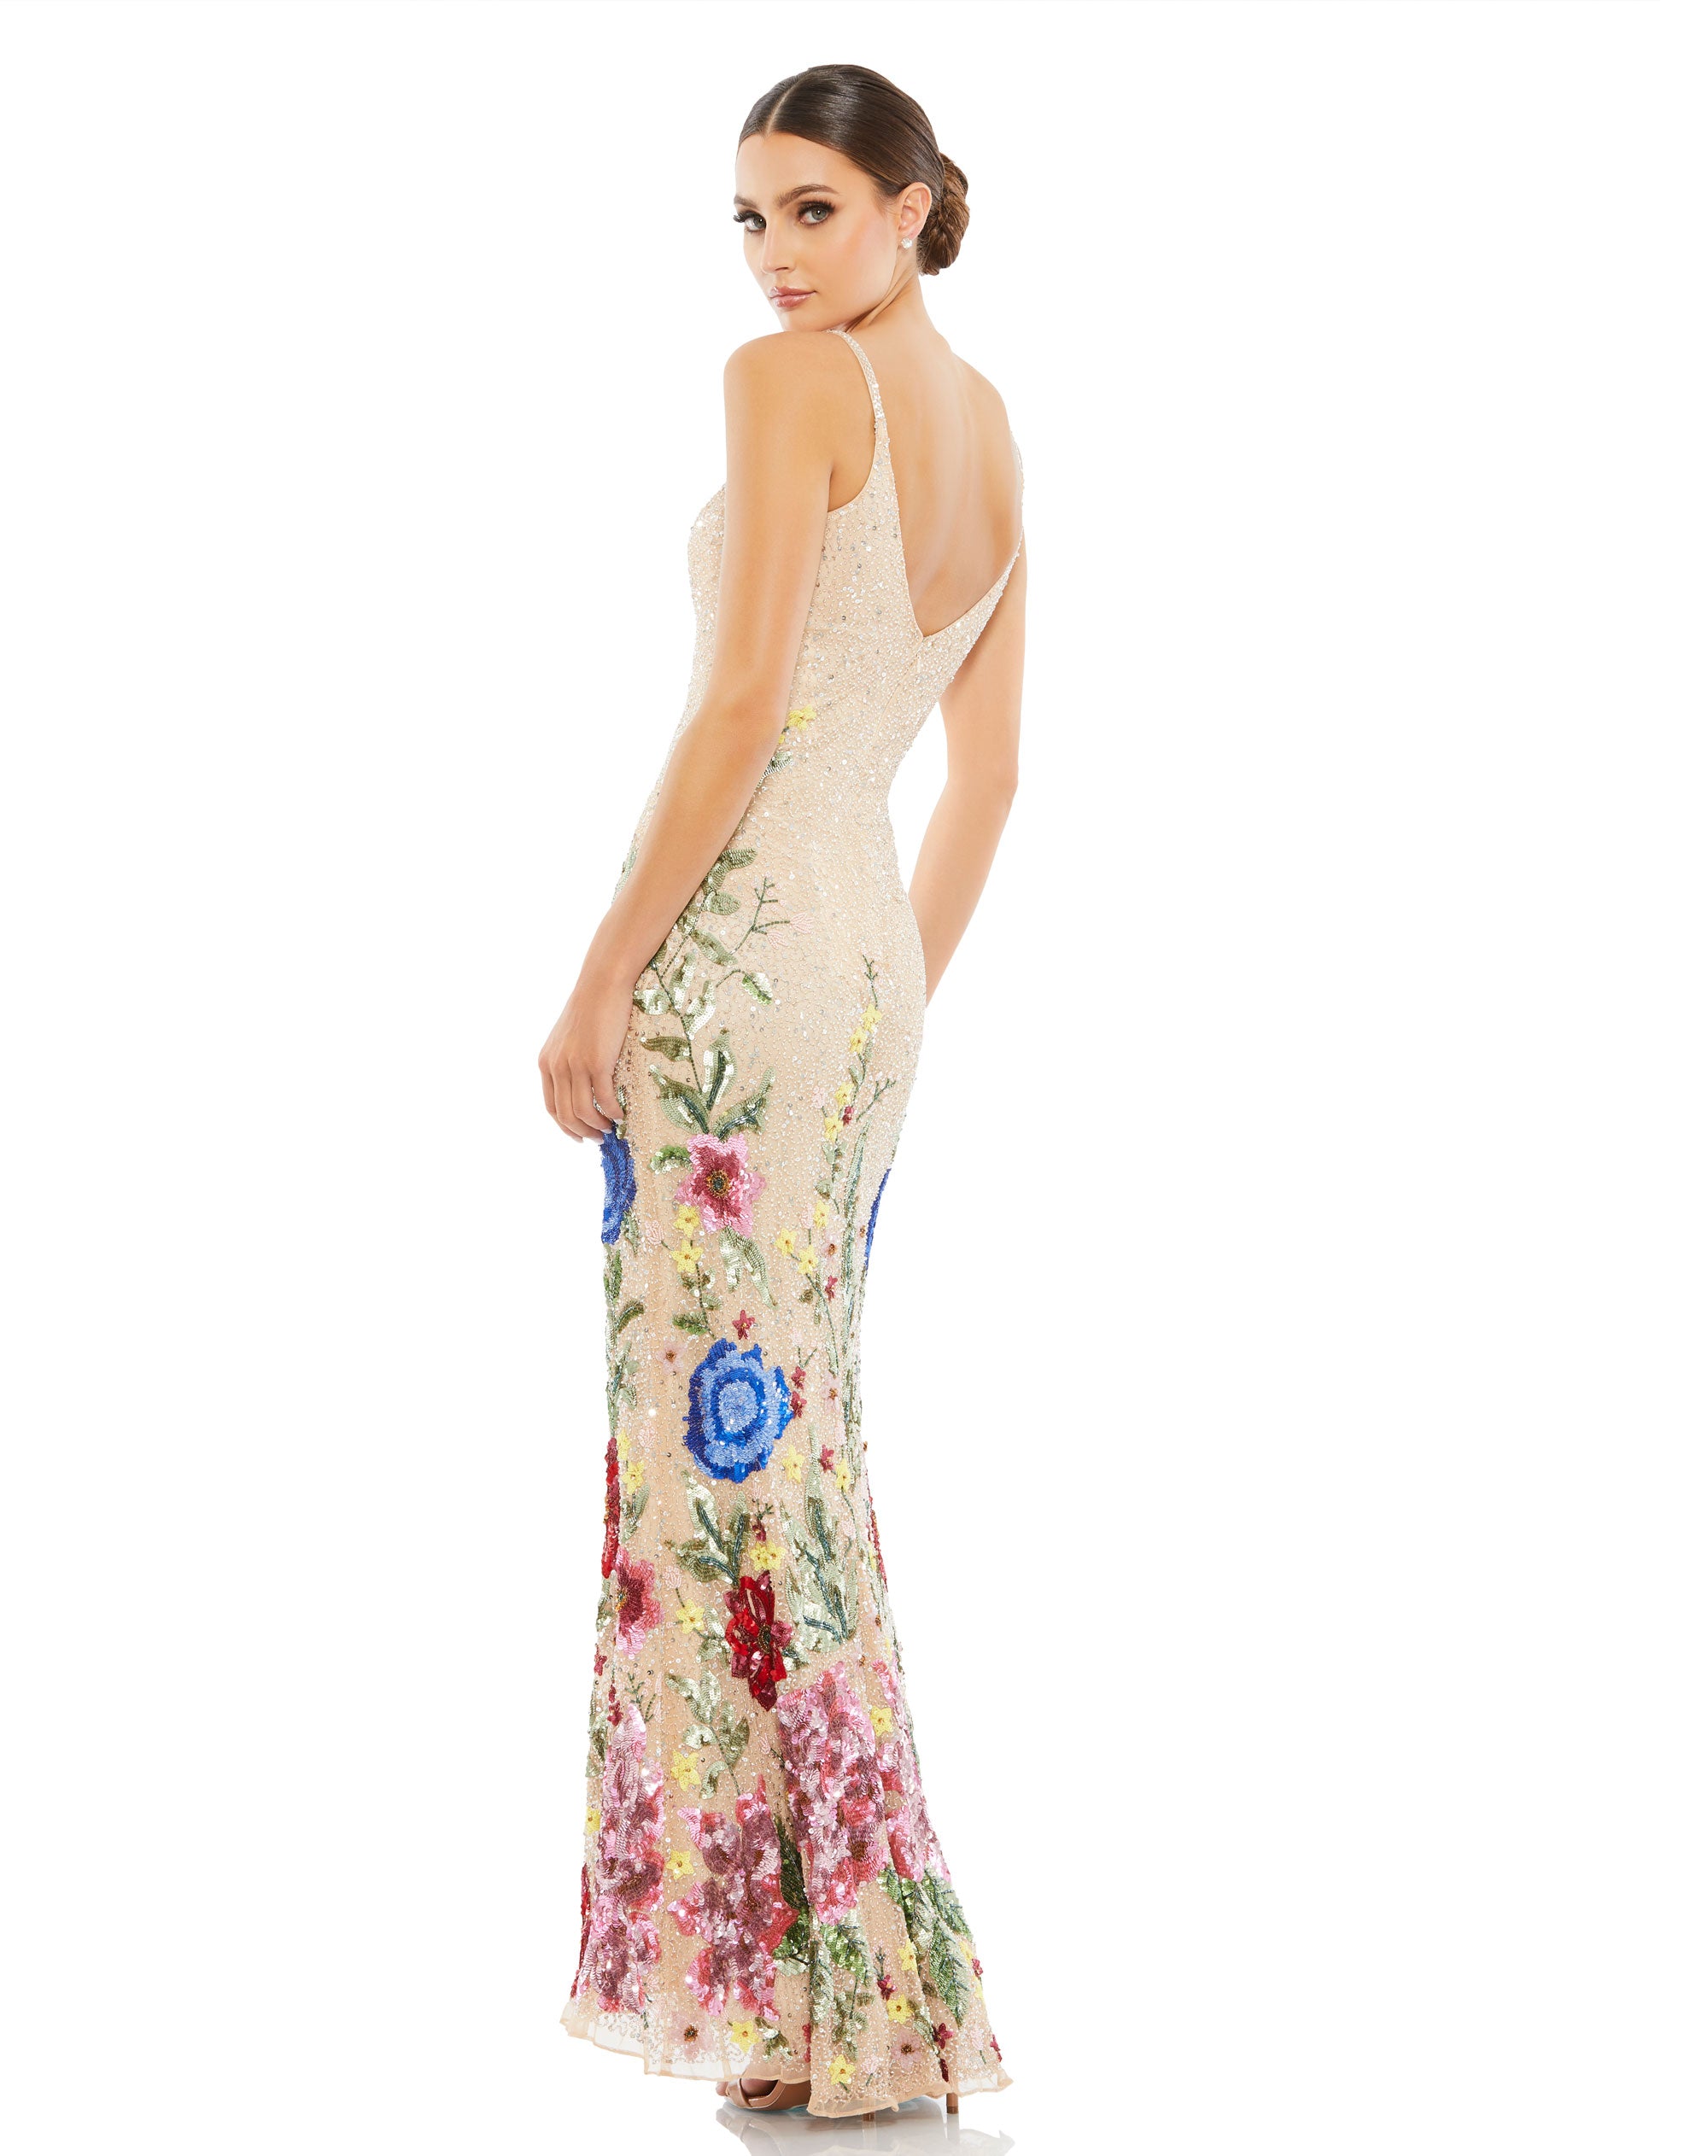 Floral Embellished Spaghetti Strap Gown